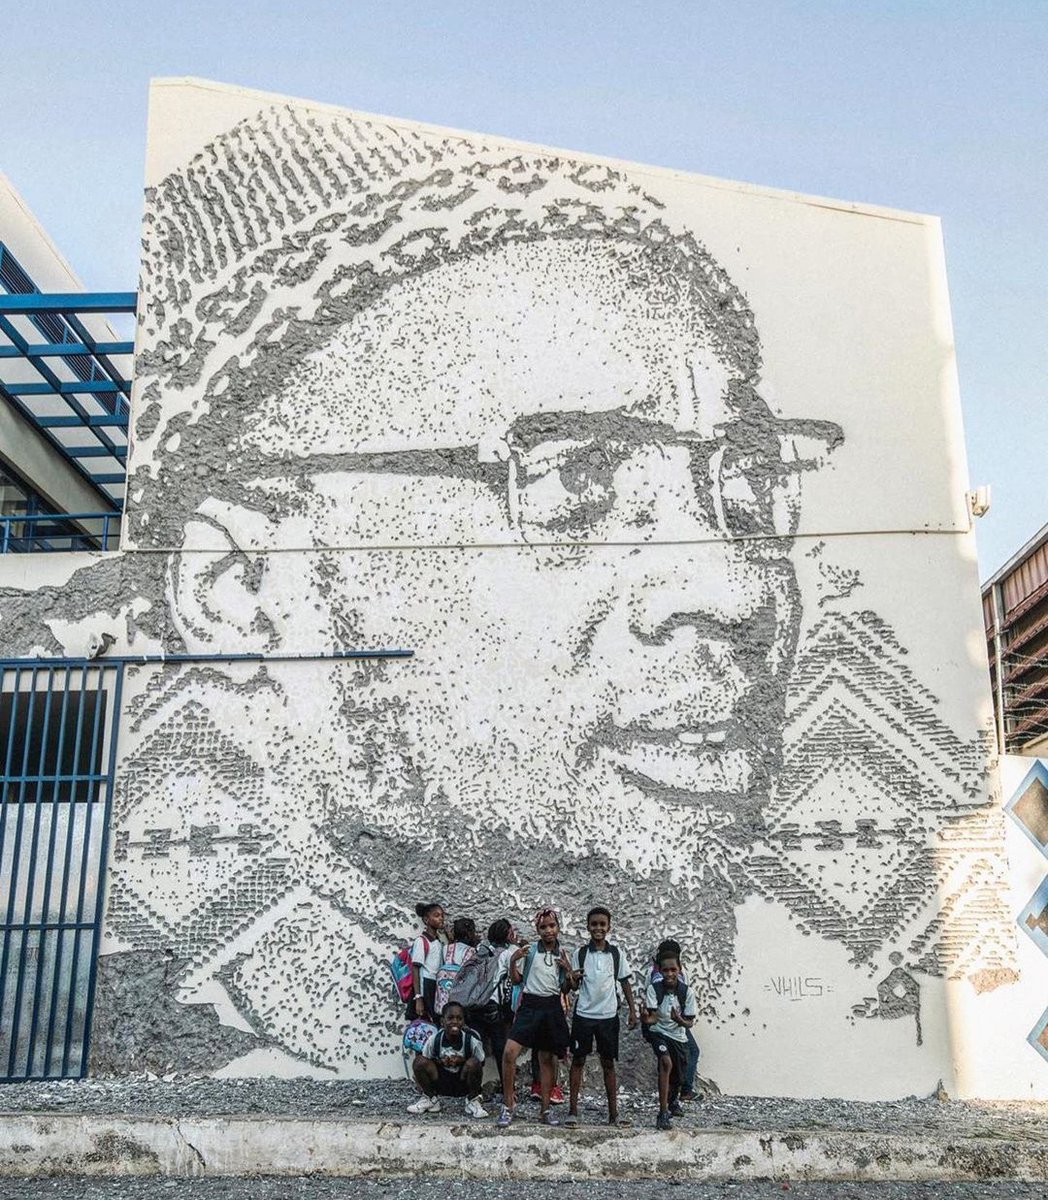 My #today's #Icons of #contemporary #StreetArt are: #CapeVerde #murals [2]